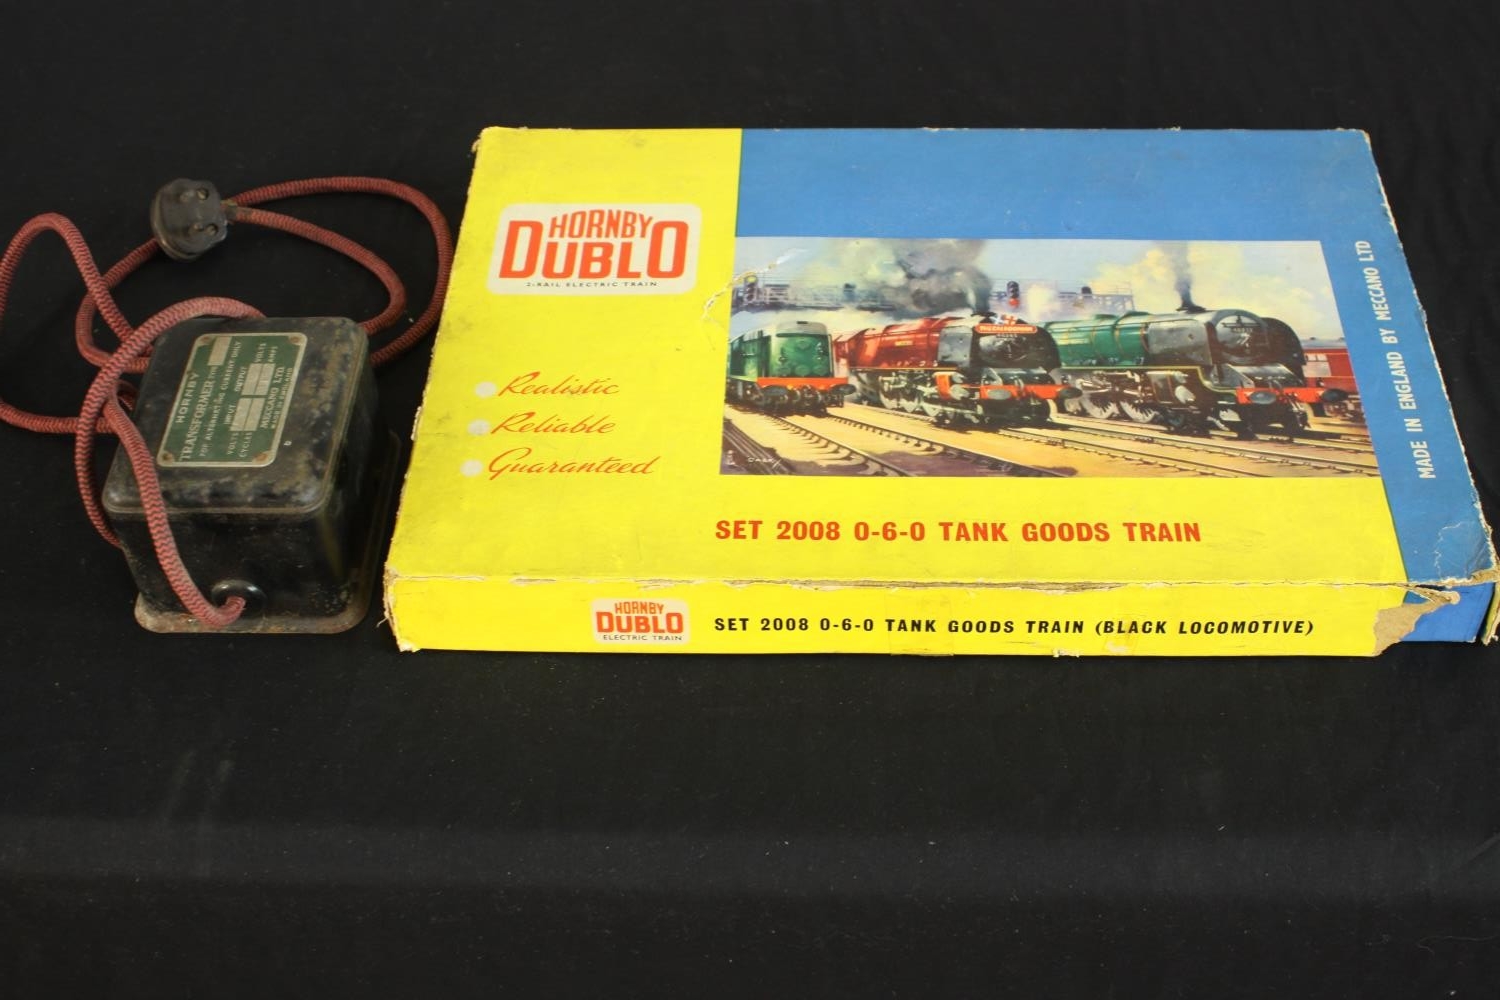 A boxed Hornby Dublo 2-rail electric train set, Set 2008 0-6-0 Tank Goods Train. Made in the UK by